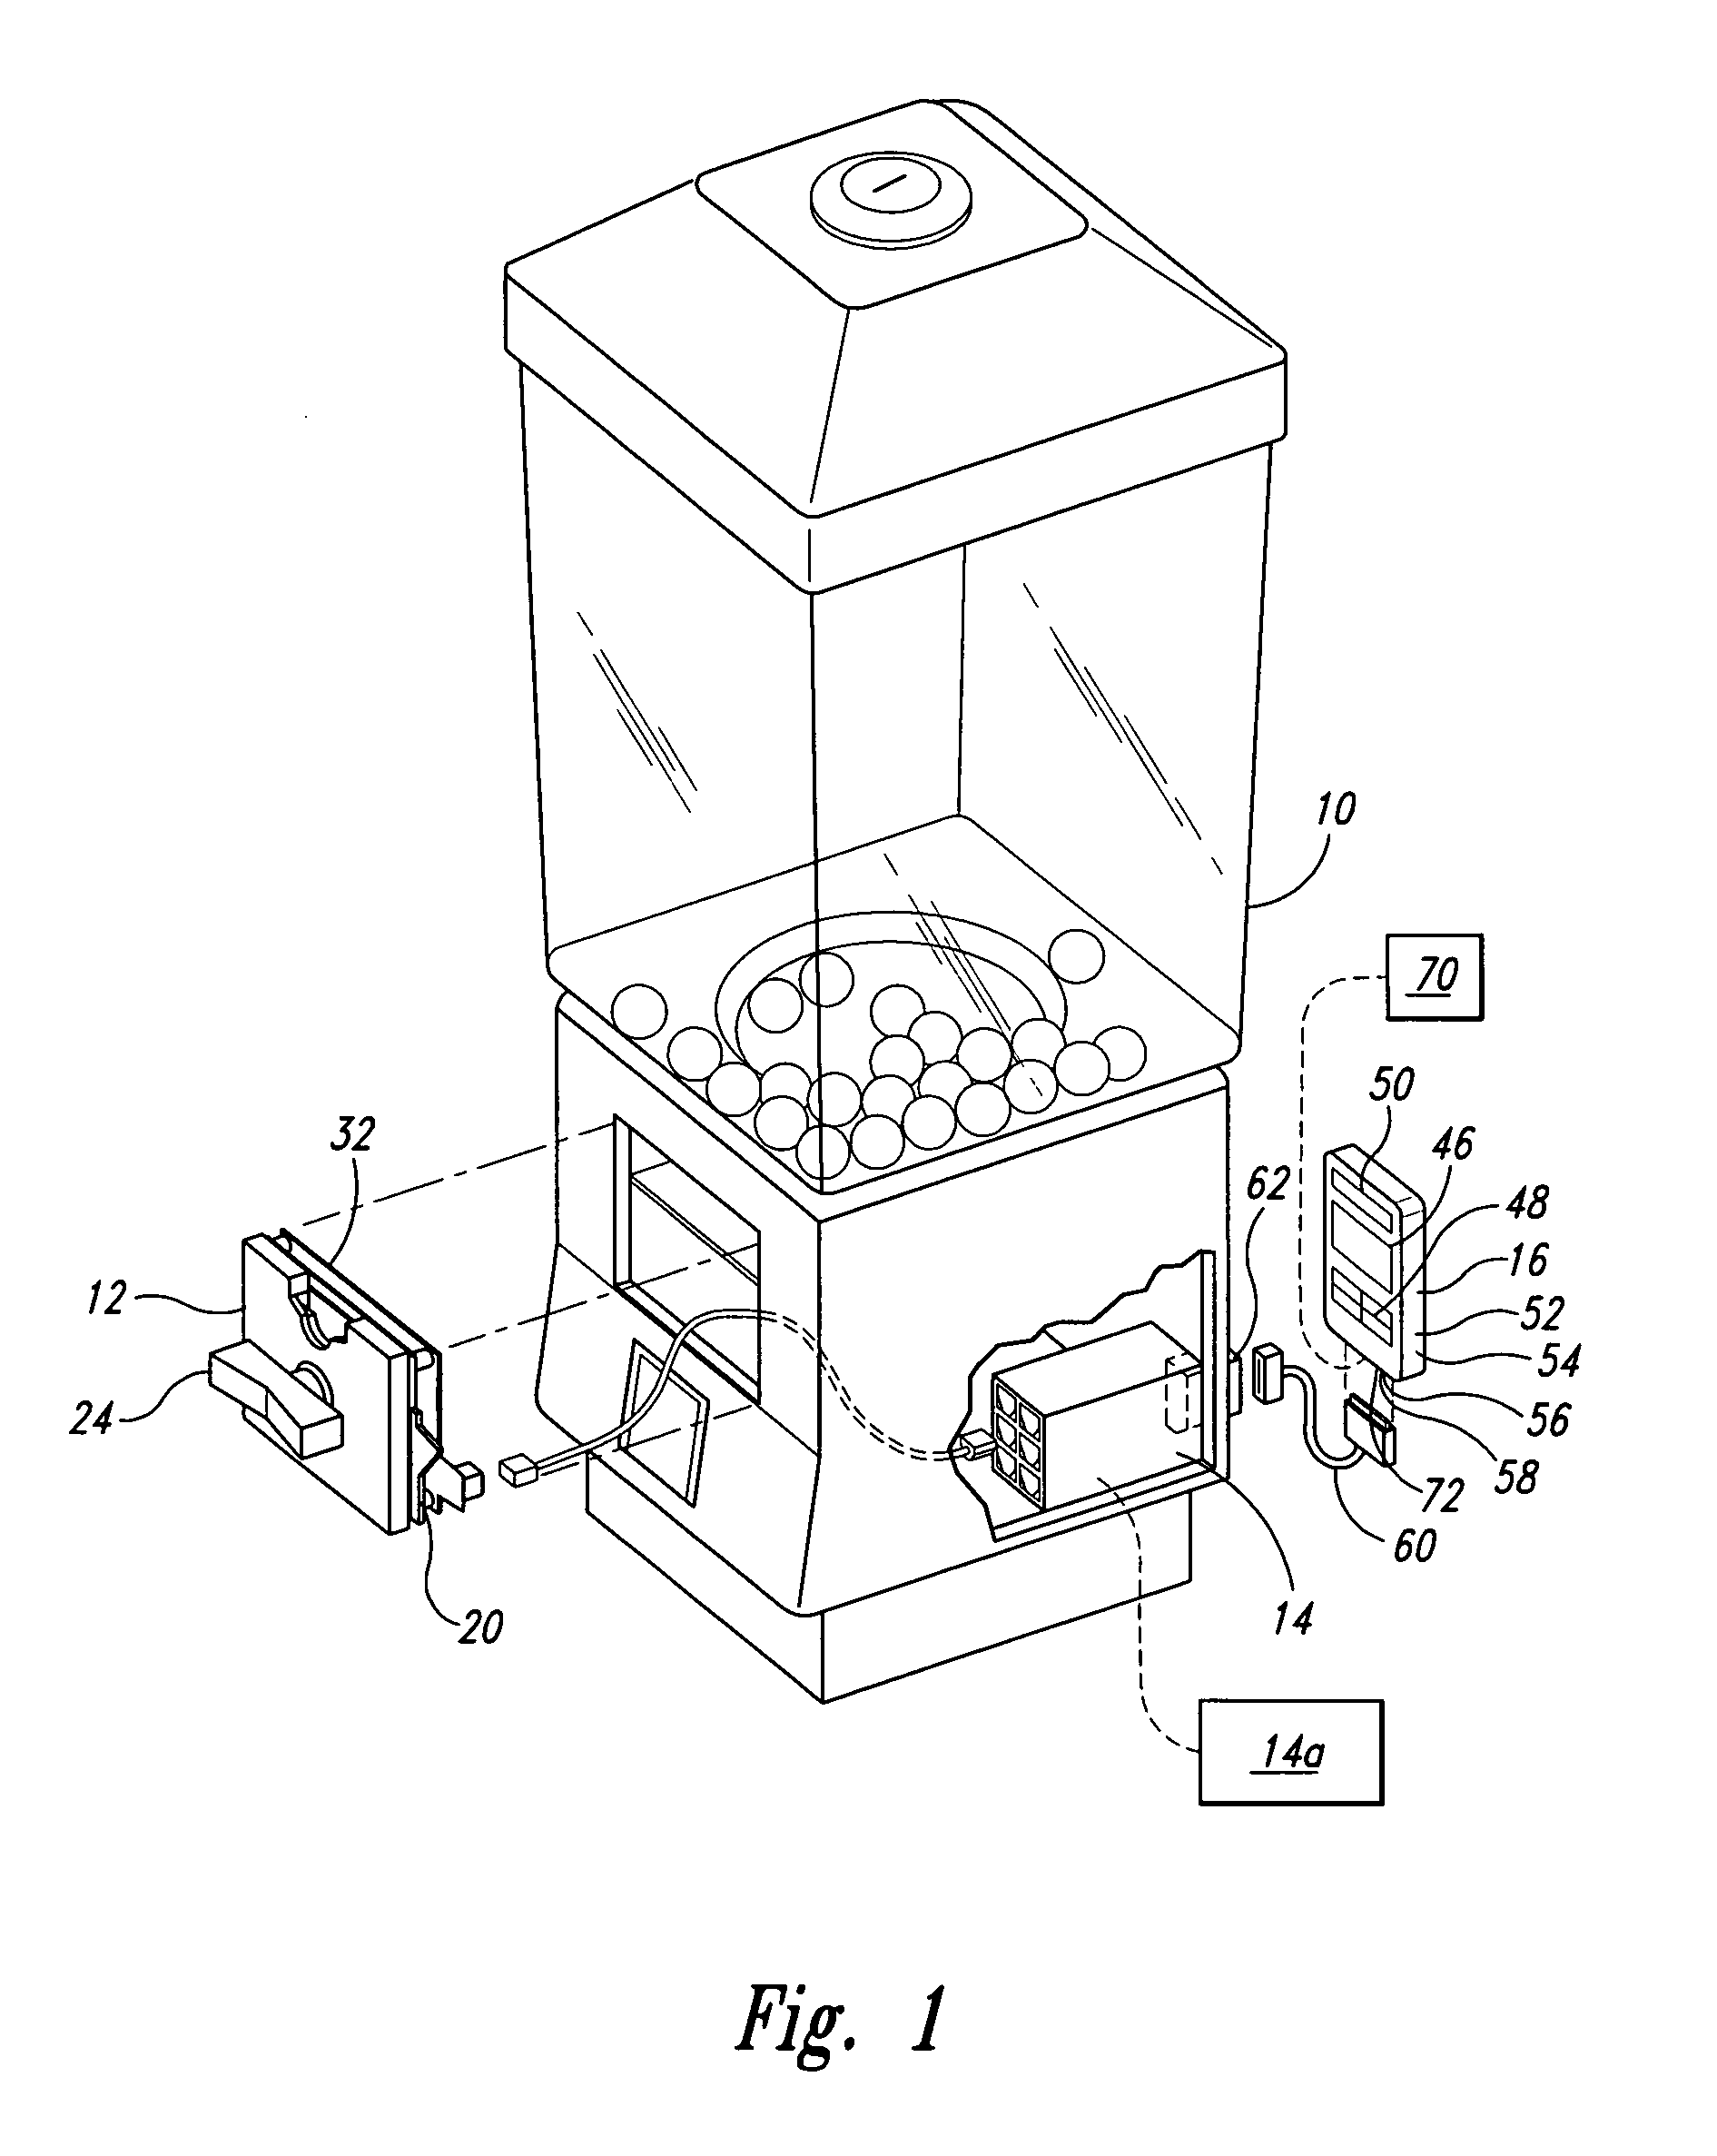 Apparatus and method for securely monitoring the sales transactions of bulk vending machines